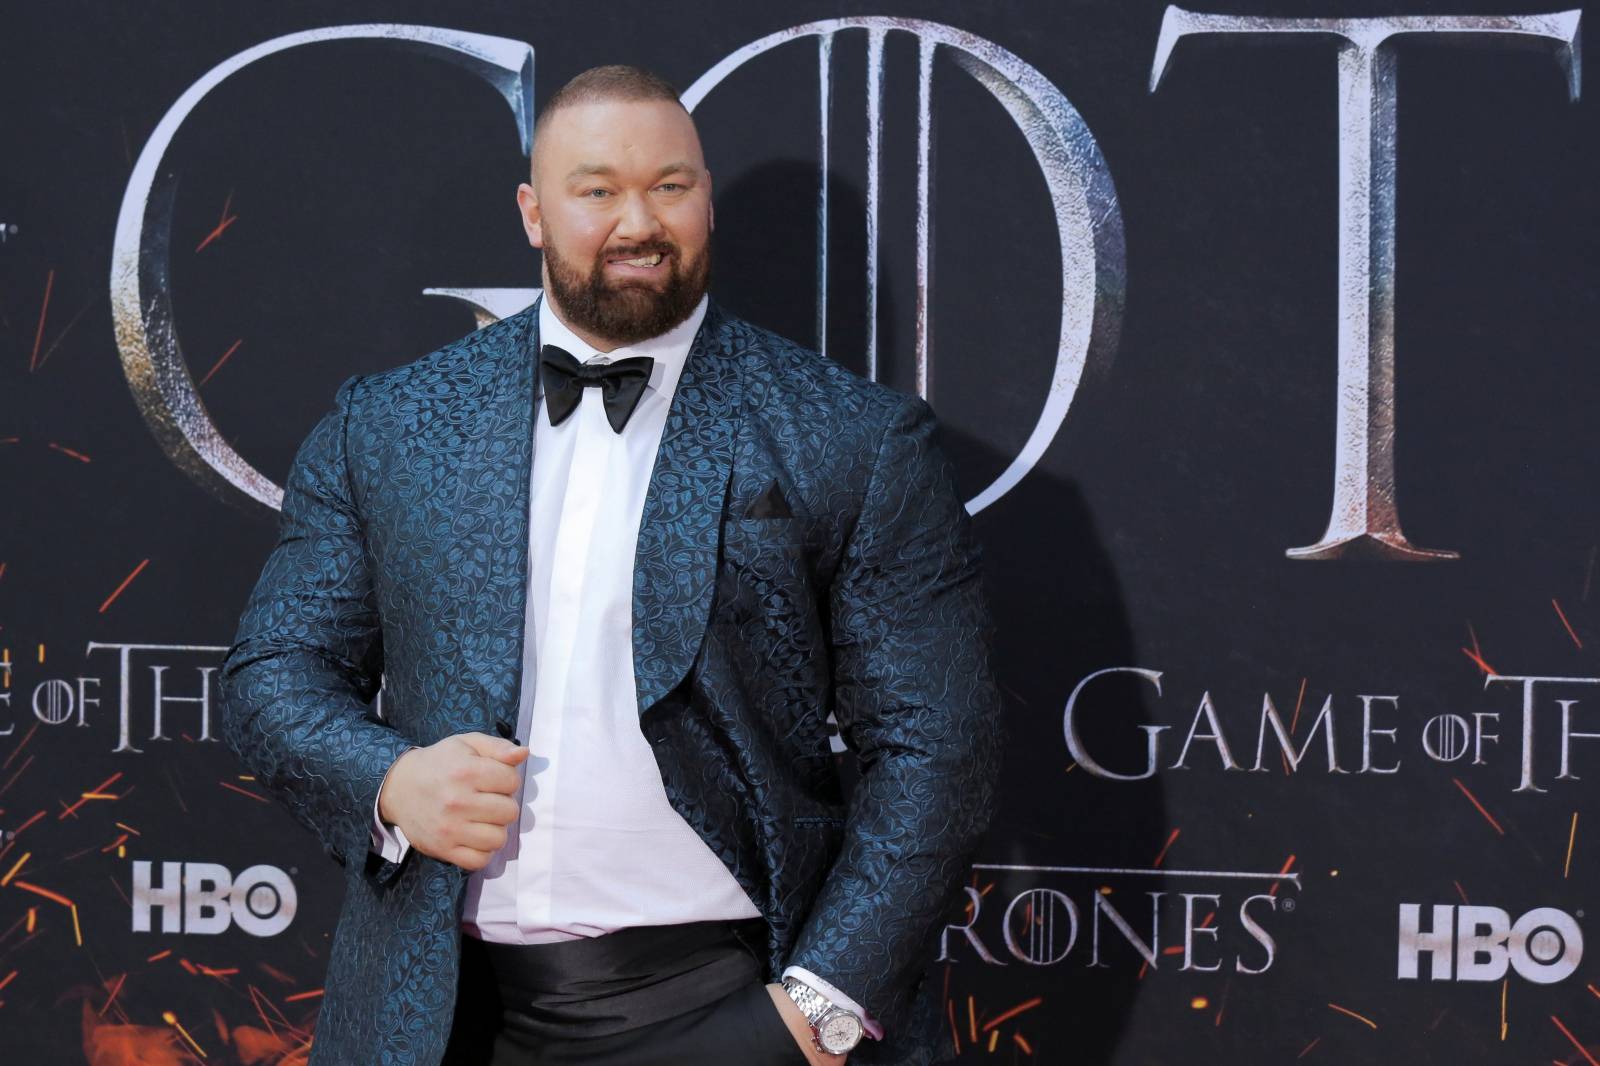 Hafthor Julius Bjornsson arrives for the premiere of the final season of "Game of Thrones" at Radio City Music Hall in New York